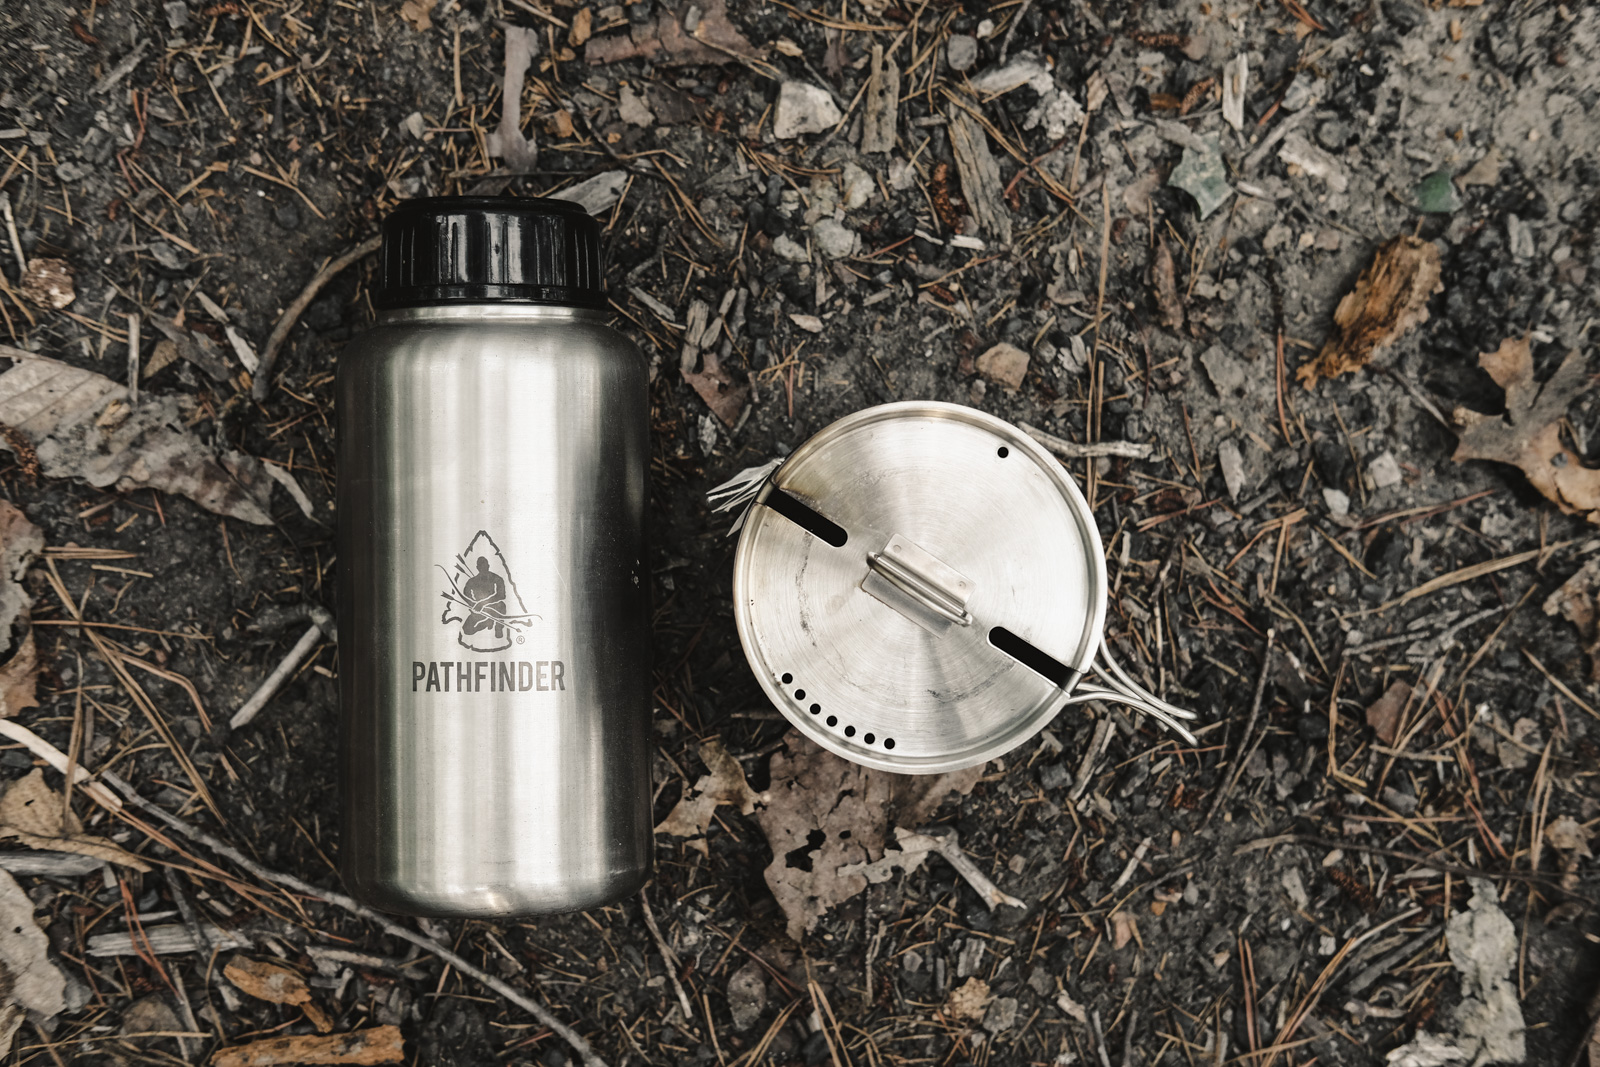 Pathfinder Bottle Cook Kit Review • Great Solo Kit for Outdoor